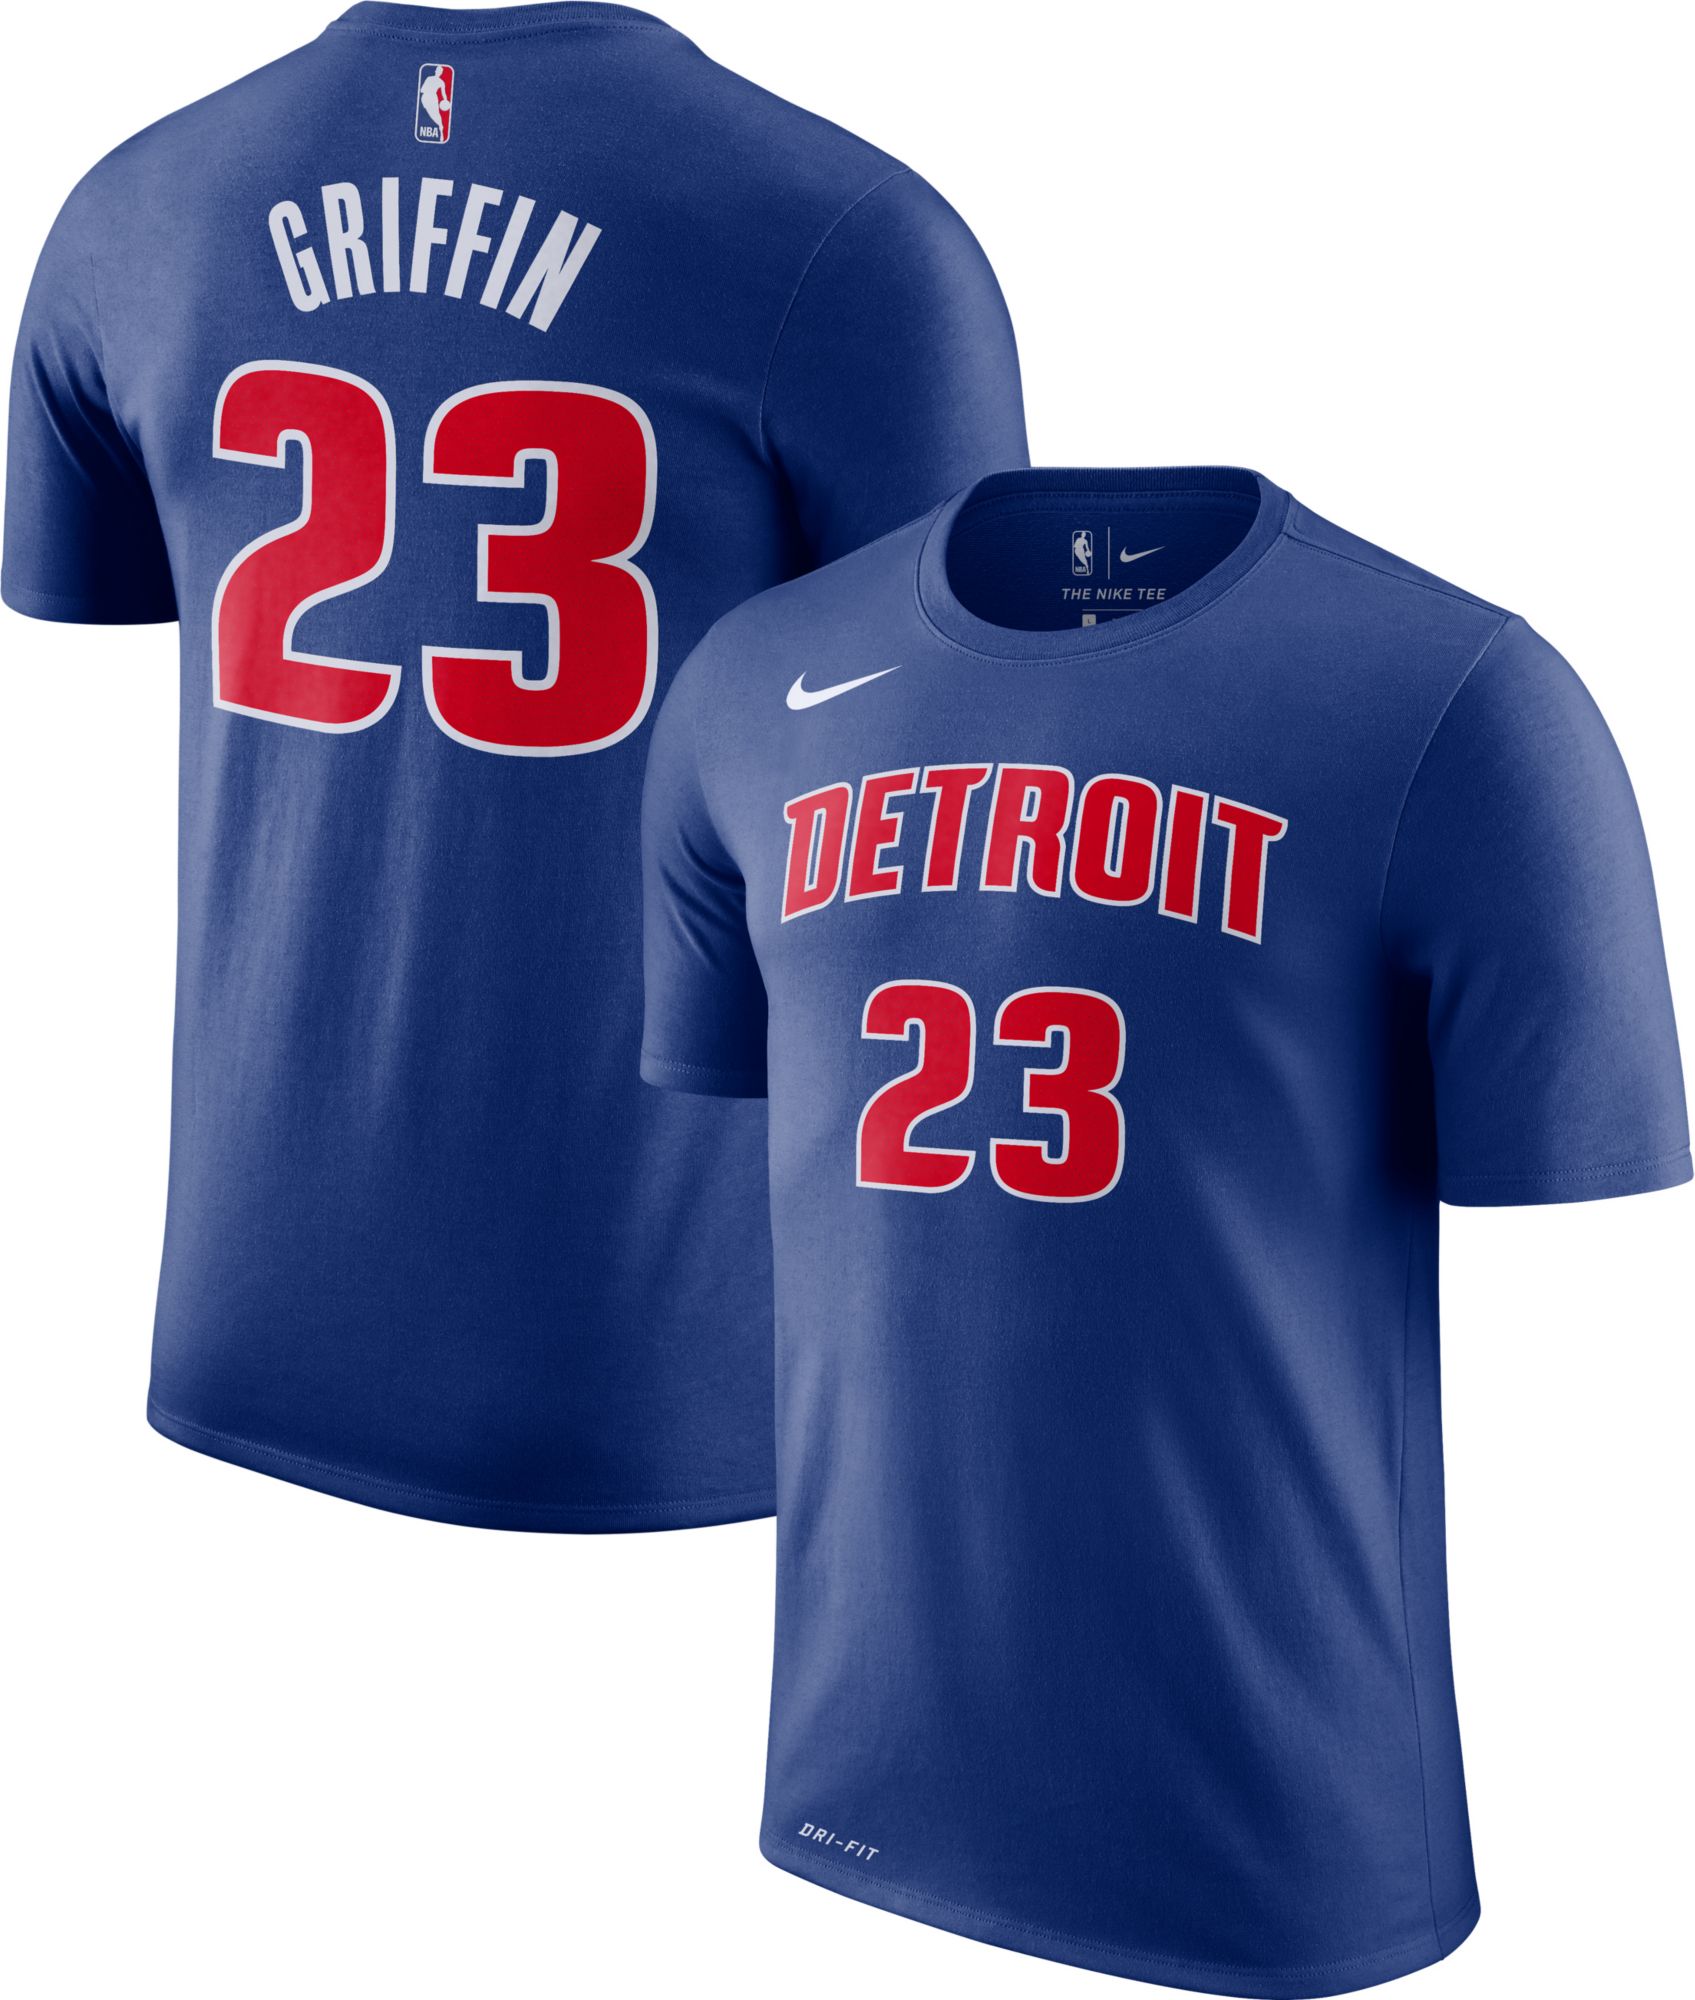 blake griffin youth jersey